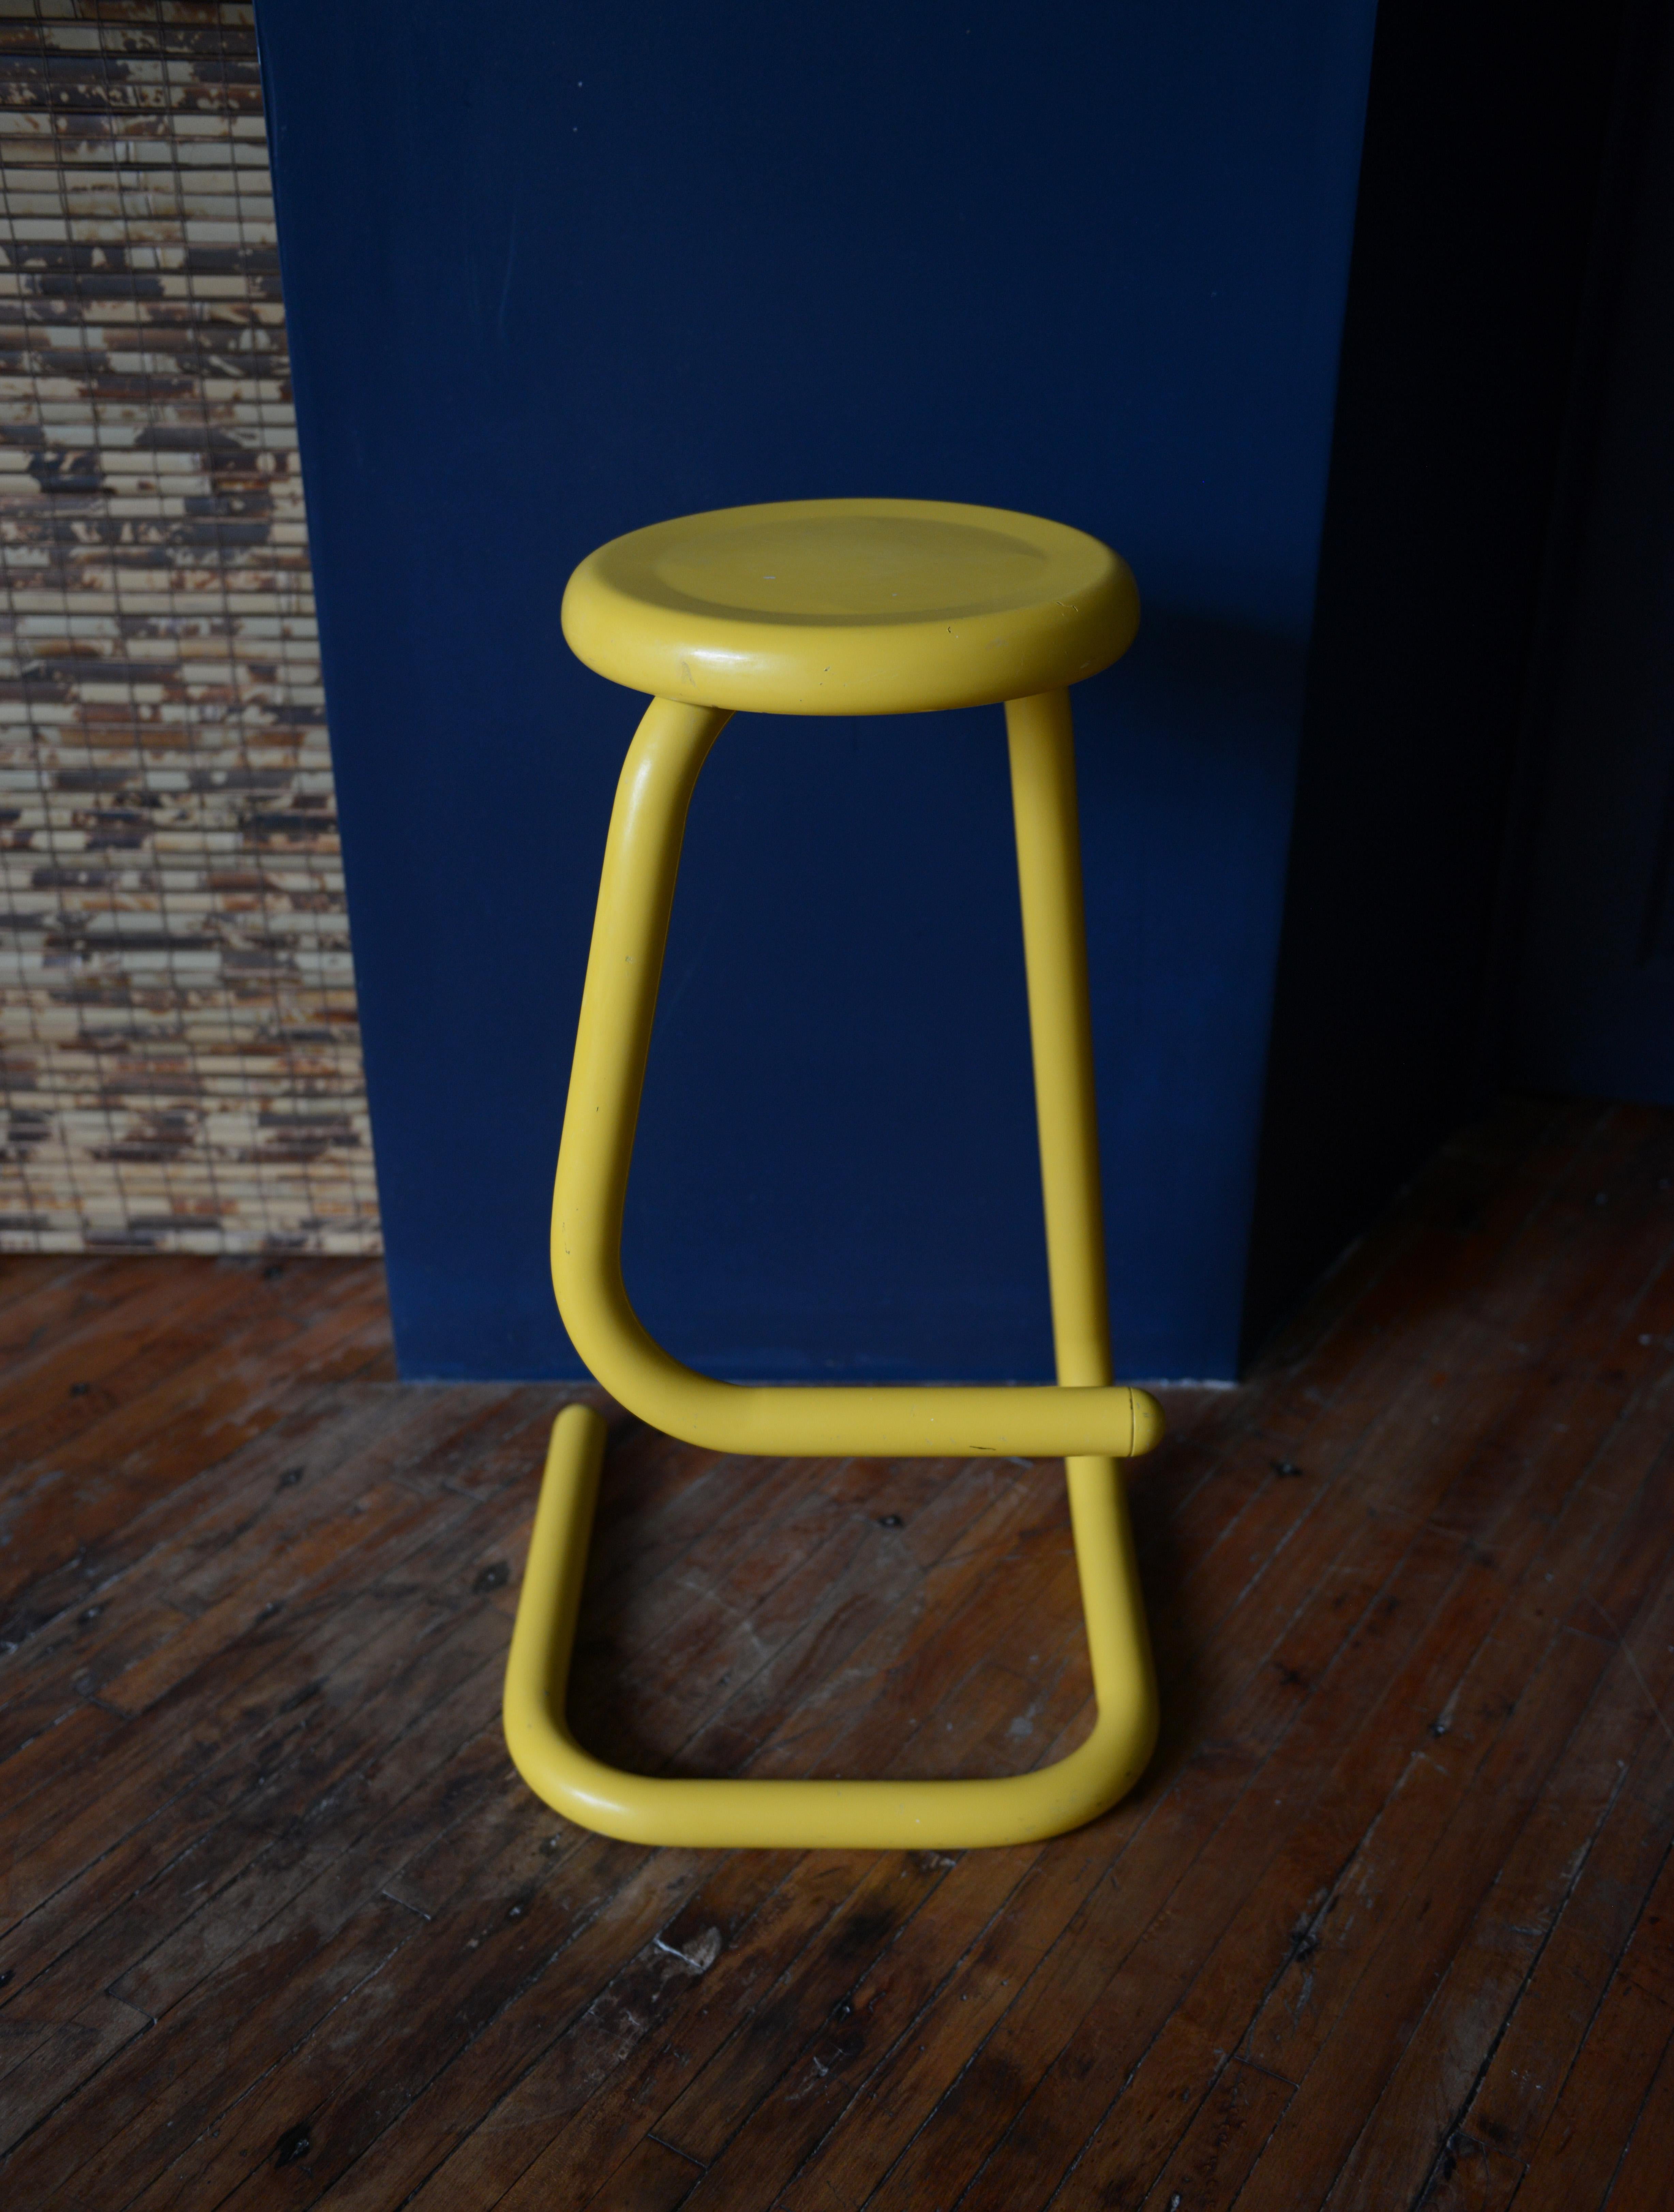 Paperclipmania! This is one awesome Haworth K700 Paperclip Barstool by Kinetics for Amisco. The bright yellow stool is the perfect room accent piece/ plant stand while still being a functional stool. The stool’s tubular steel frame offers a clean